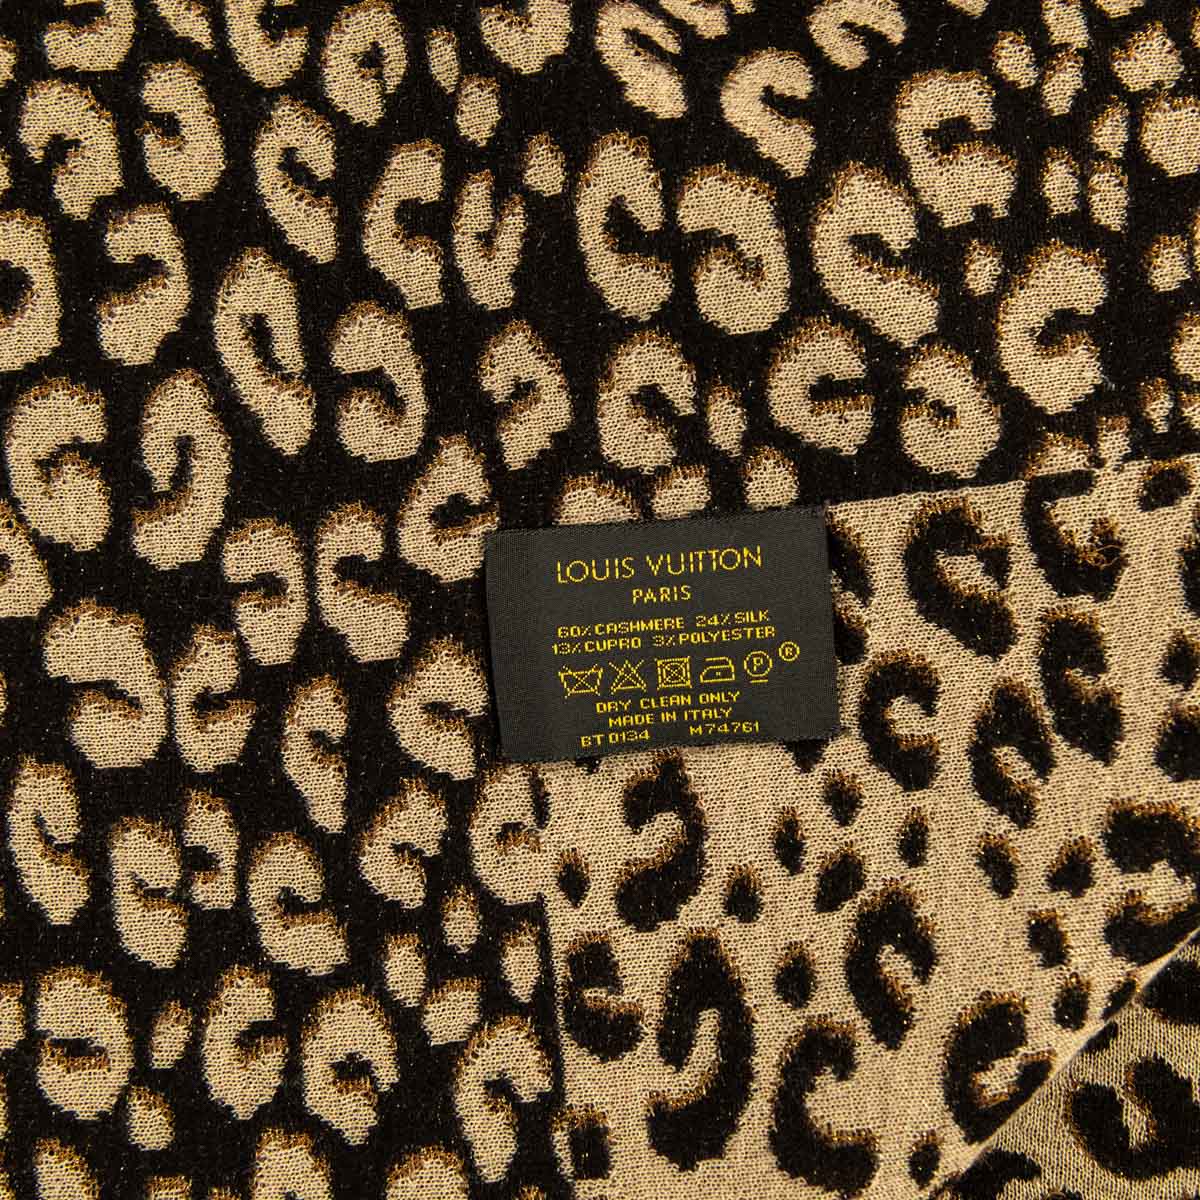 Louis Vuitton Brown Leopard Stephen Sprouse Cashmere Scarf - LV Canada